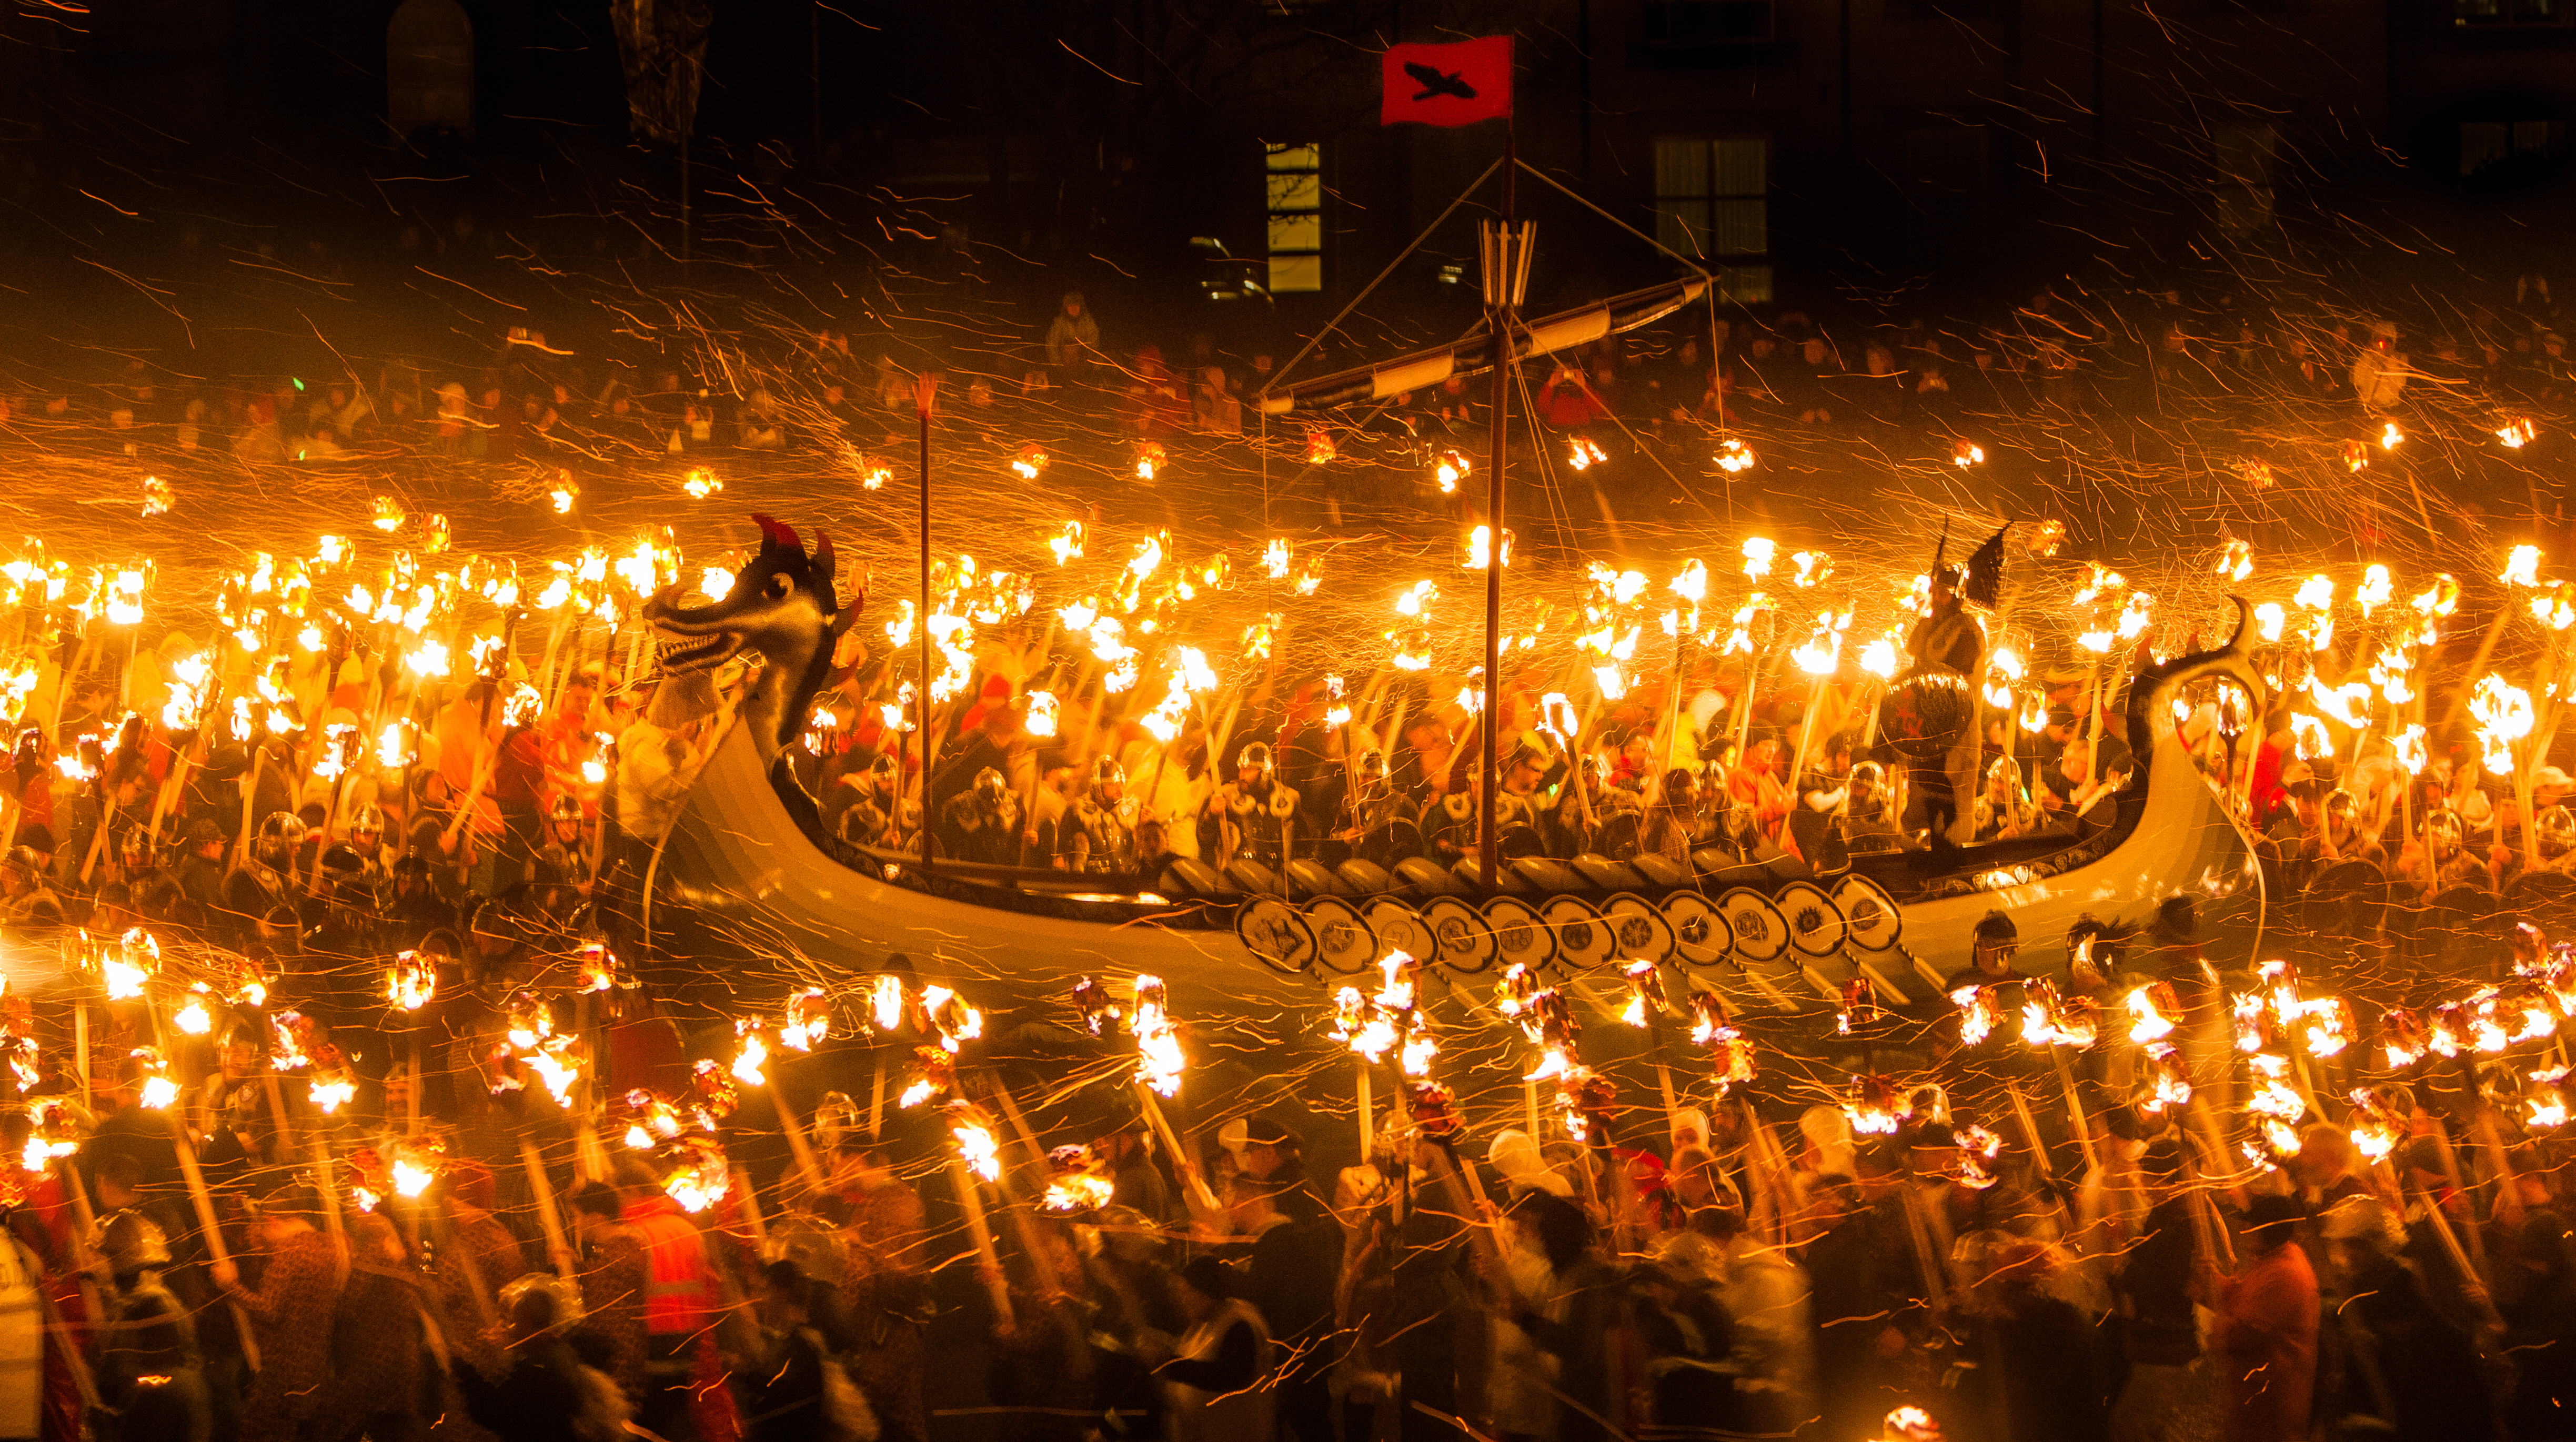 Photo by David Gifford Up Helly Aa, Scotland Taking place in Lerwick, Shetland on the last Tuesday in January, Up Helly Aa is a Norse themed sub-Arctic bonfire party on a grand scale. Recognised as Europe’s biggest fire festival, there are marches by day and torchfire by night. Men dressed as Vikings lead a procession through the town and, as night arrives, a thousand torches light up the sky as they set fire to a long boat in the city centre. Amidst singing and revelry, the fiery glow burns and celebrations continue long into the night.